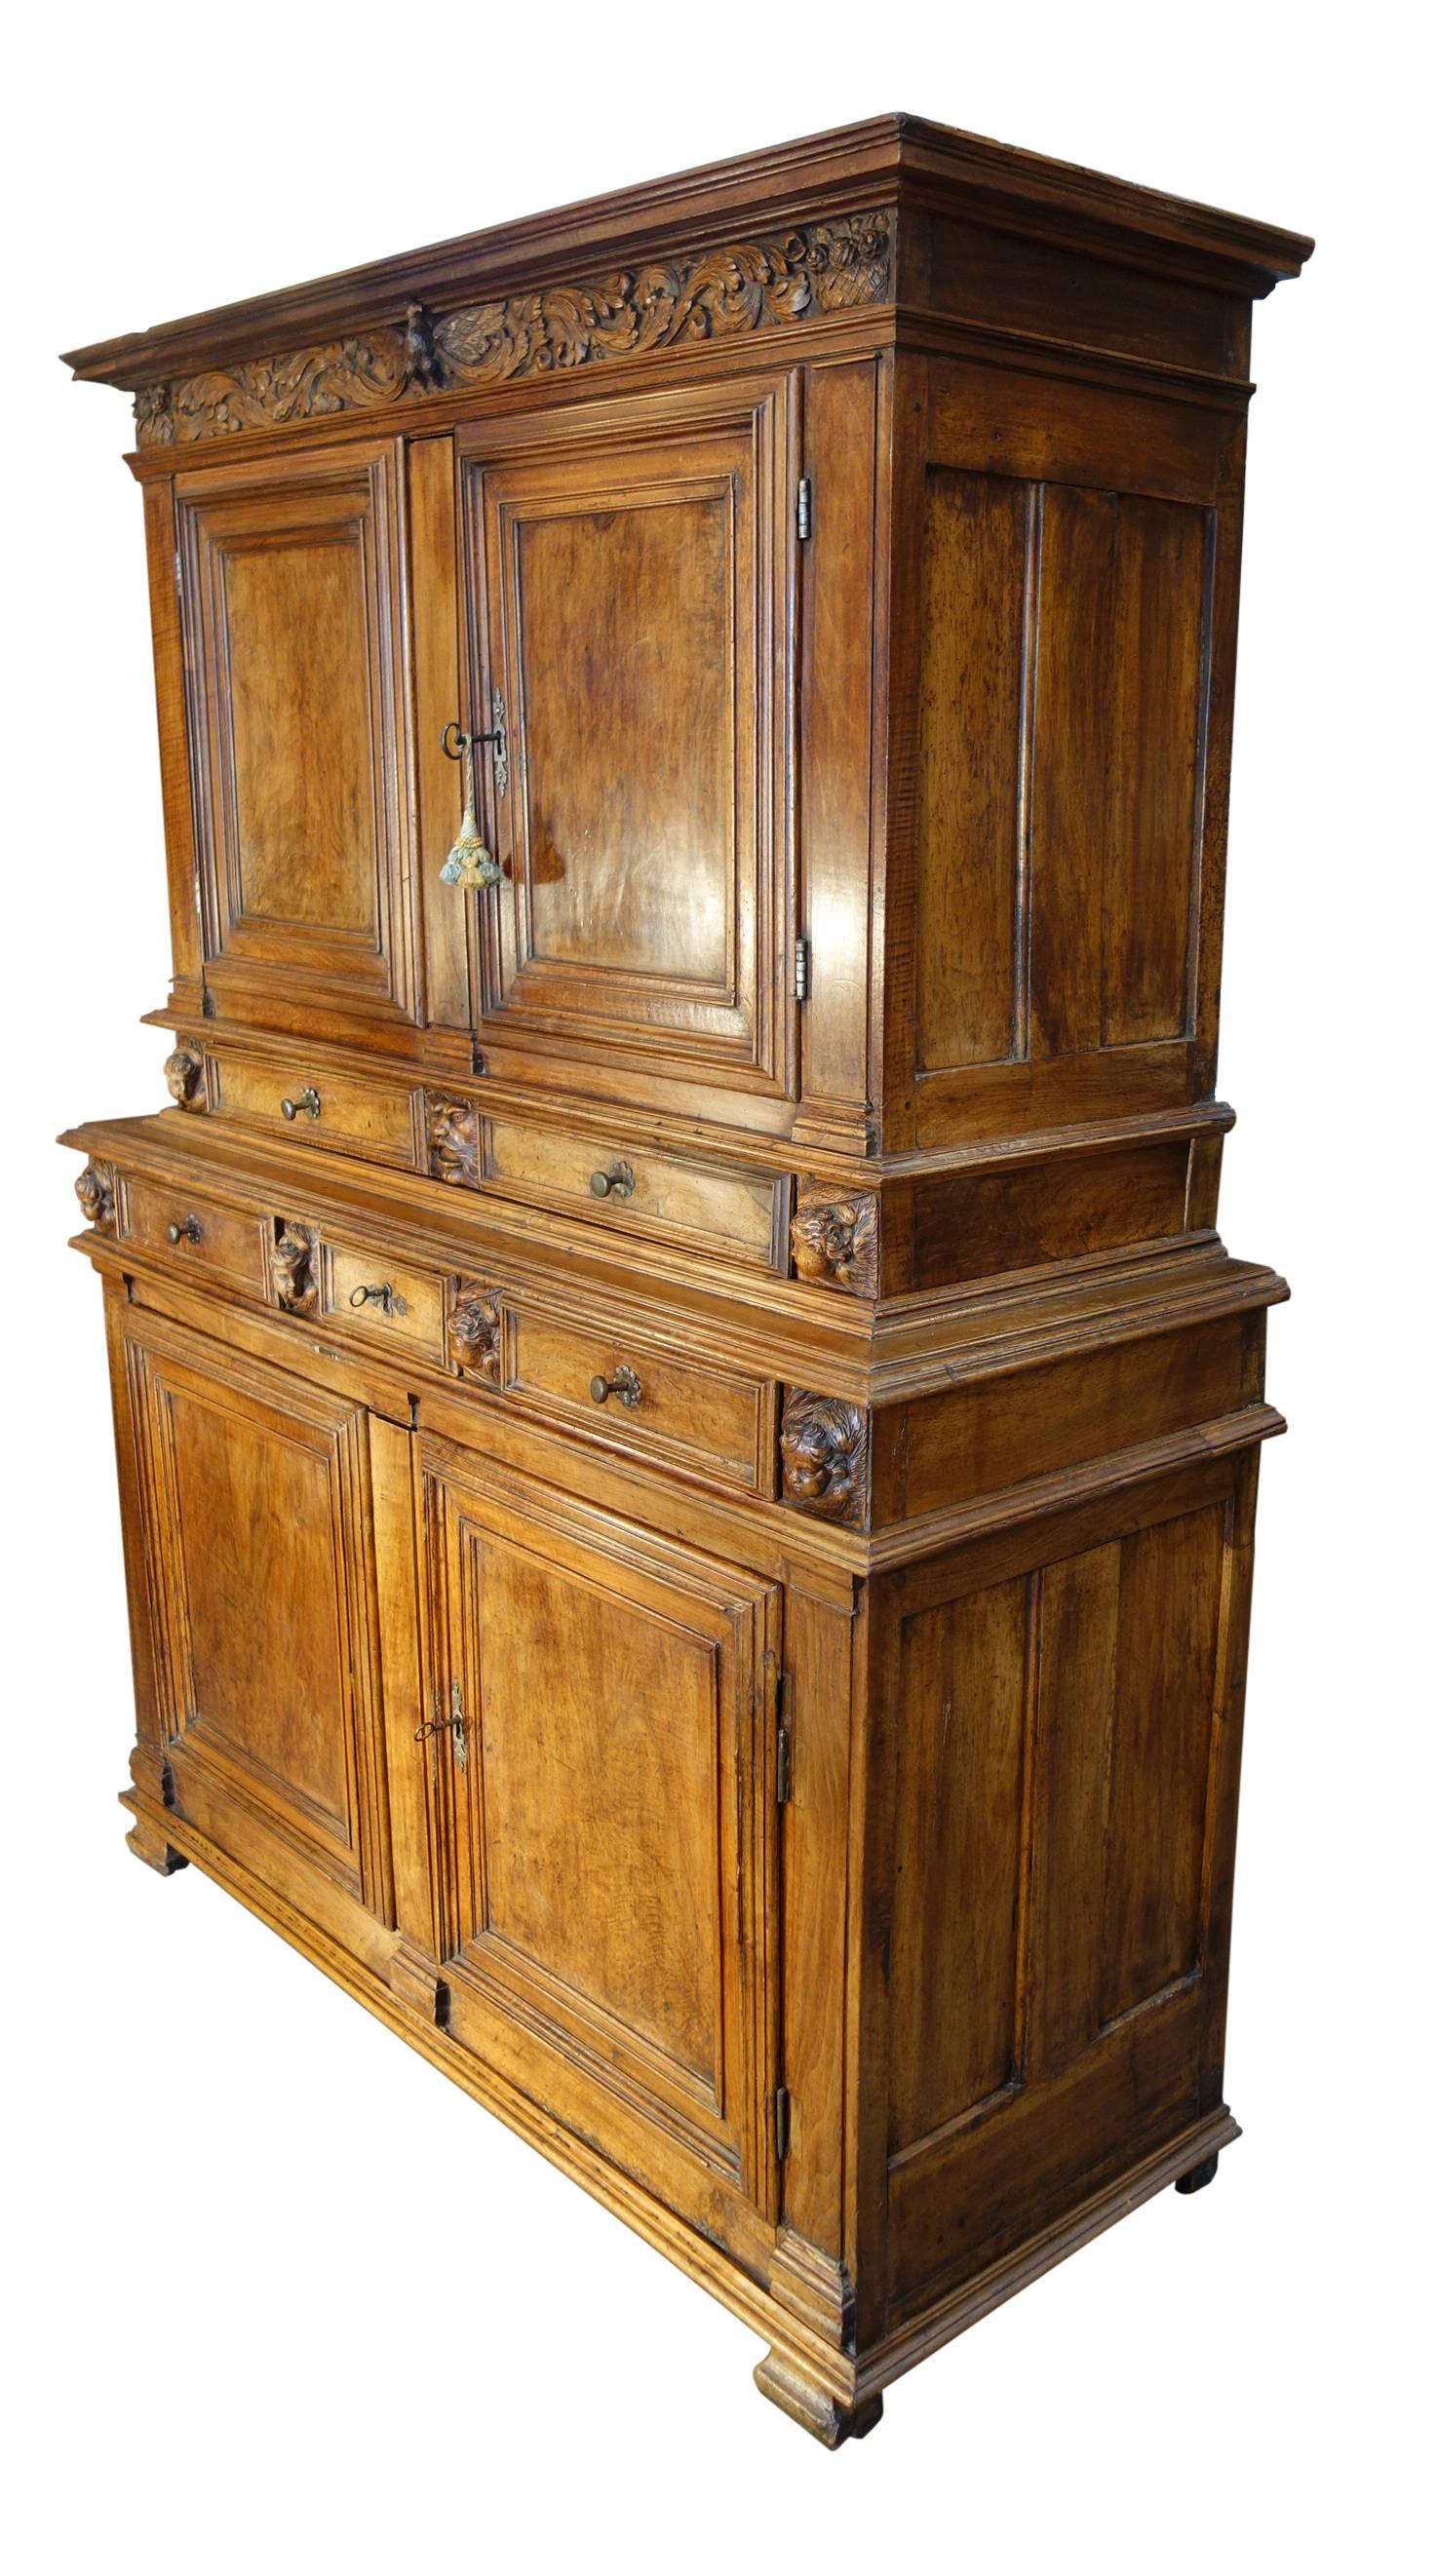 Impressive Tuscan Renaissance style double credenza hutch in solid walnut with old-world patina and hand-carved caryatids double door upper cabinet with lock and key, two-drawer and three-drawer stacked lower cabinet over double